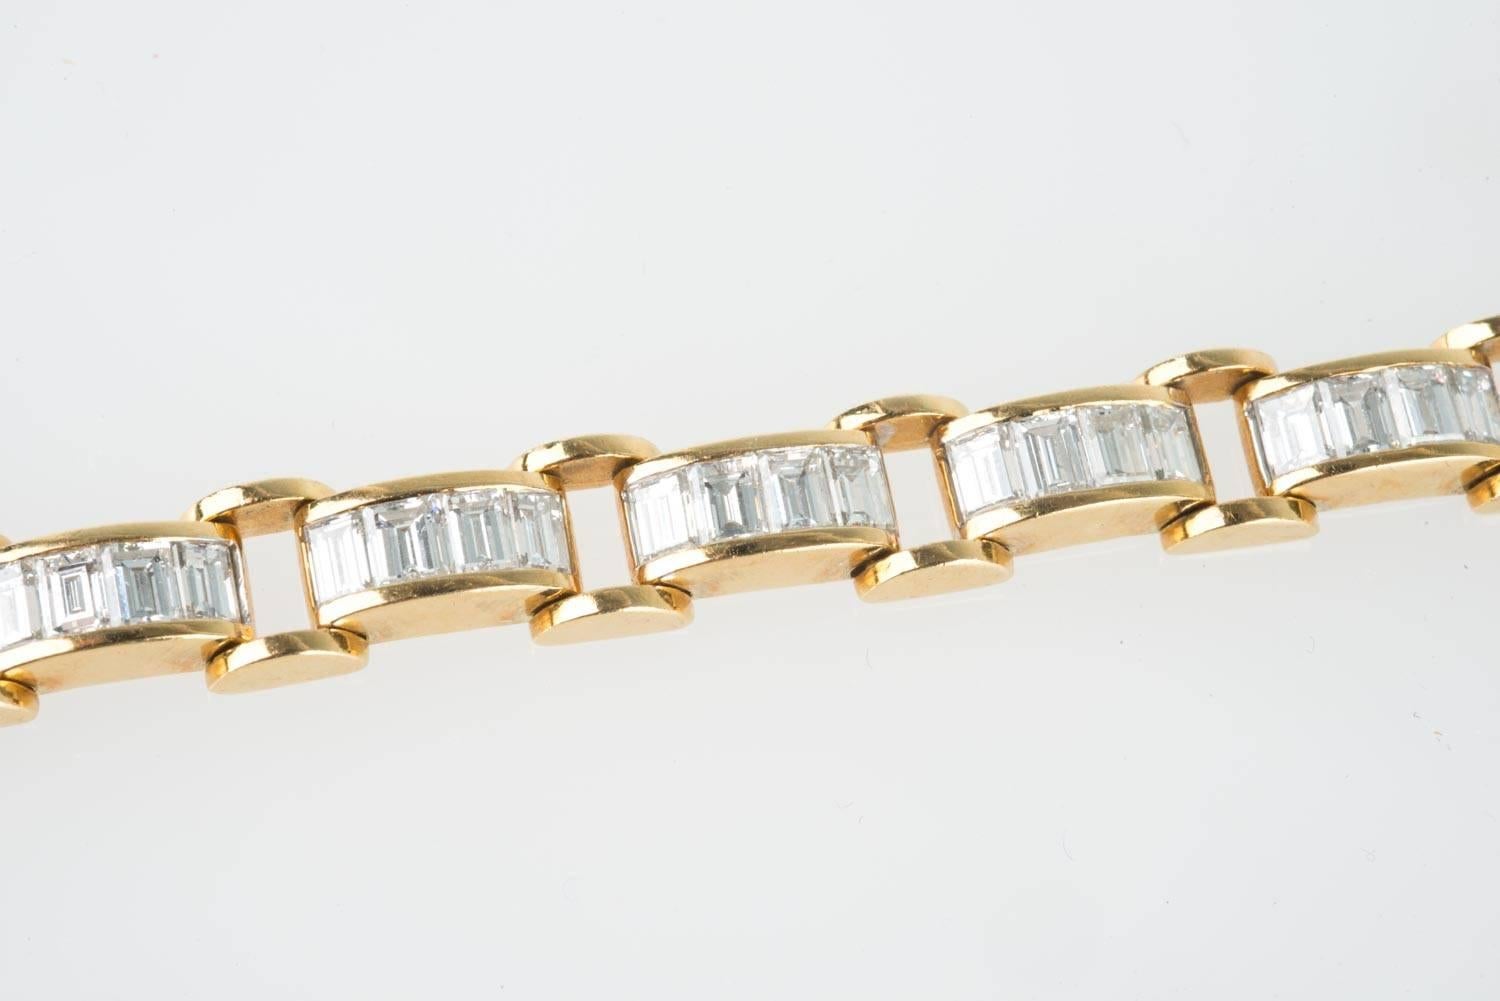 18K Stamped .750 yellow gold and diamond bracelet 6.85-carat tcw, GIA certified, in a Chain Link style, with a total of 60 Baguette diamonds. The bracelet is approximate 6 1/2"-inches long x 1/4"-inches x 1/8"-inches thick. The